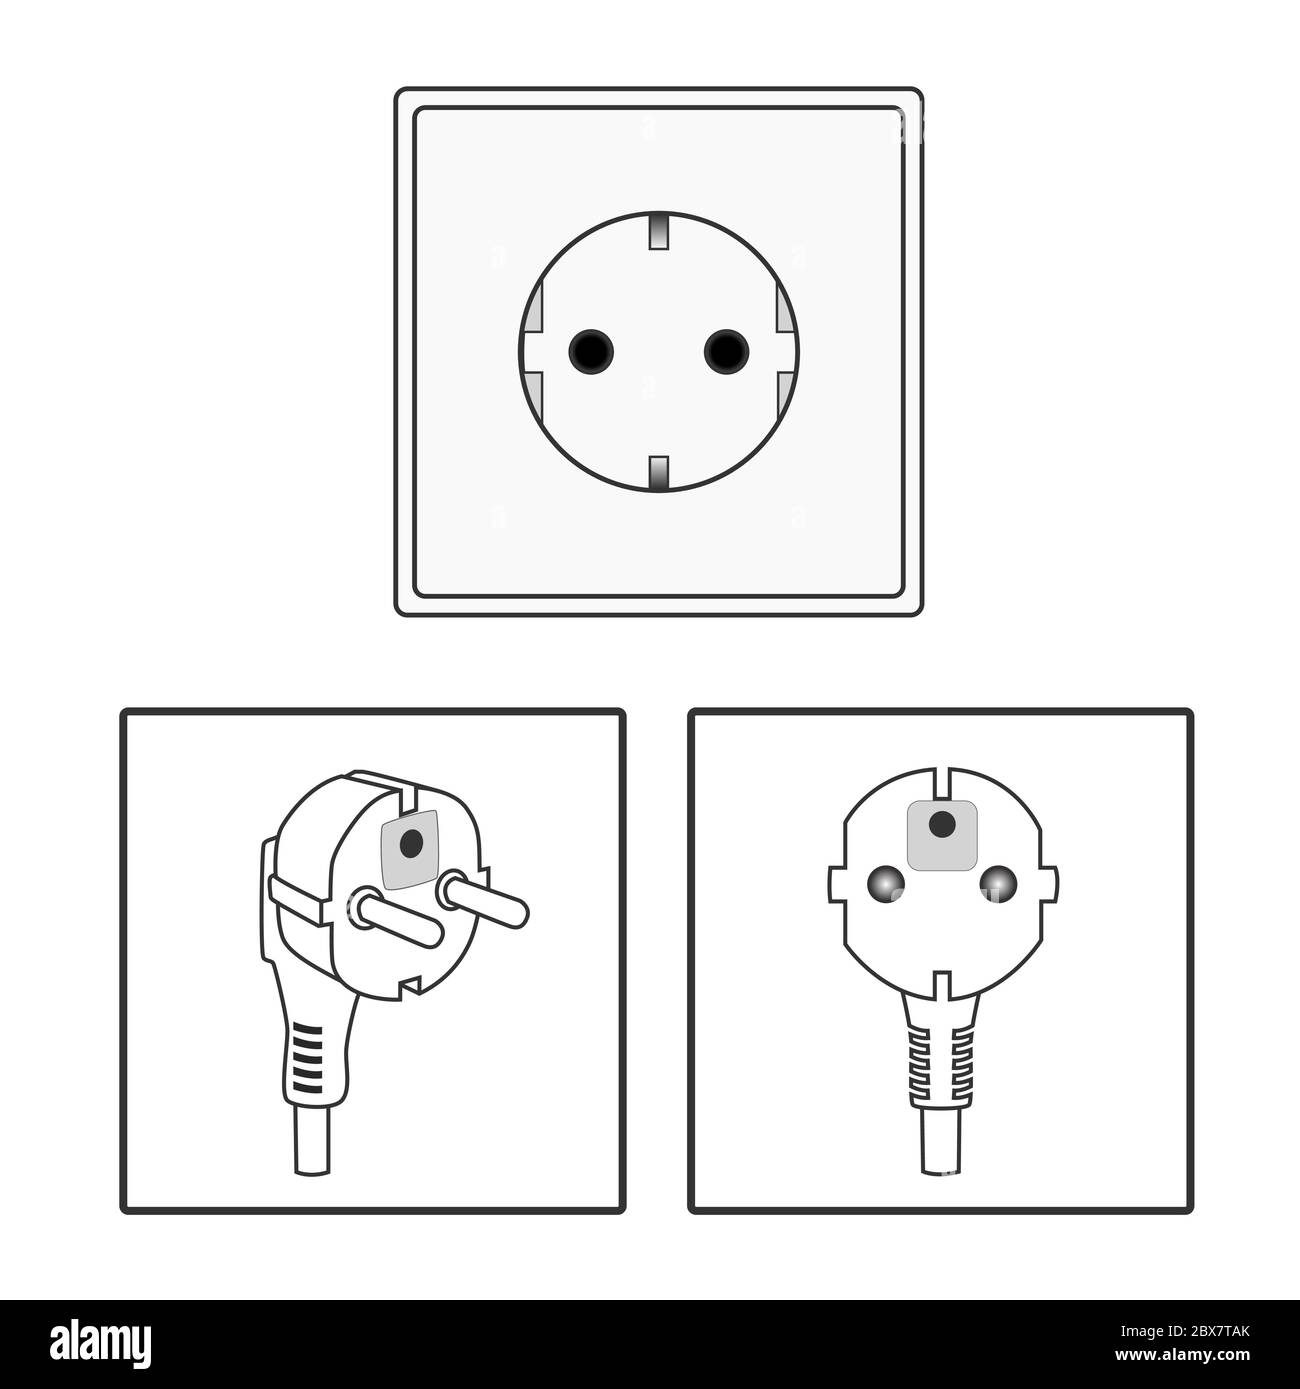 Euro socket and plug. Icon set. Two 2 pin socket sheme isolated vector  graphic illustration. simple diagram electrical appliance plug Stock Vector  Image & Art - Alamy